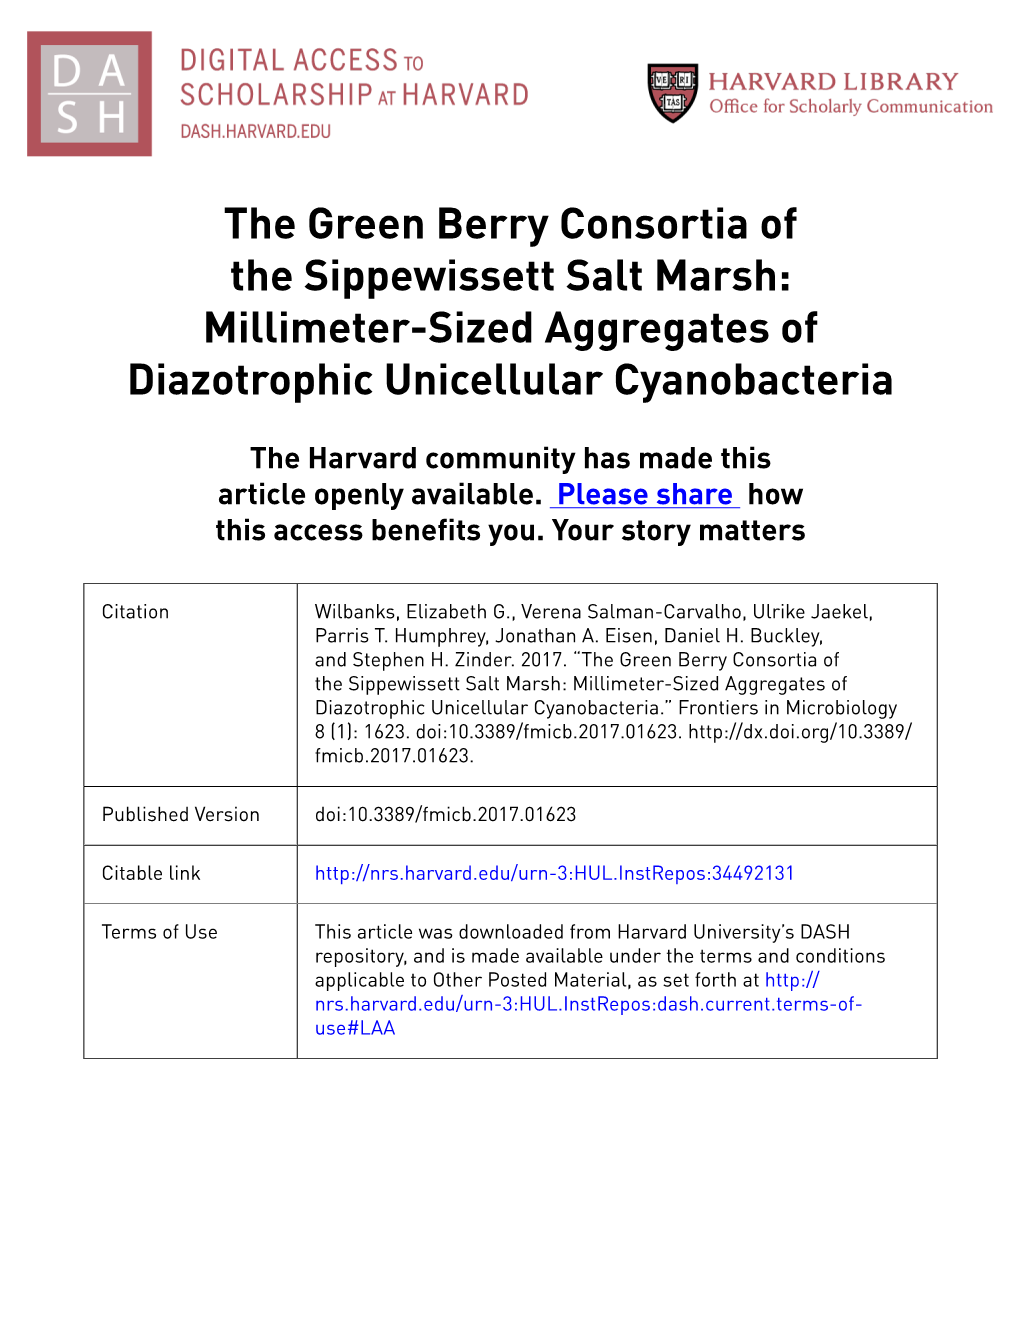 The Green Berry Consortia of the Sippewissett Salt Marsh: Millimeter-Sized Aggregates of Diazotrophic Unicellular Cyanobacteria